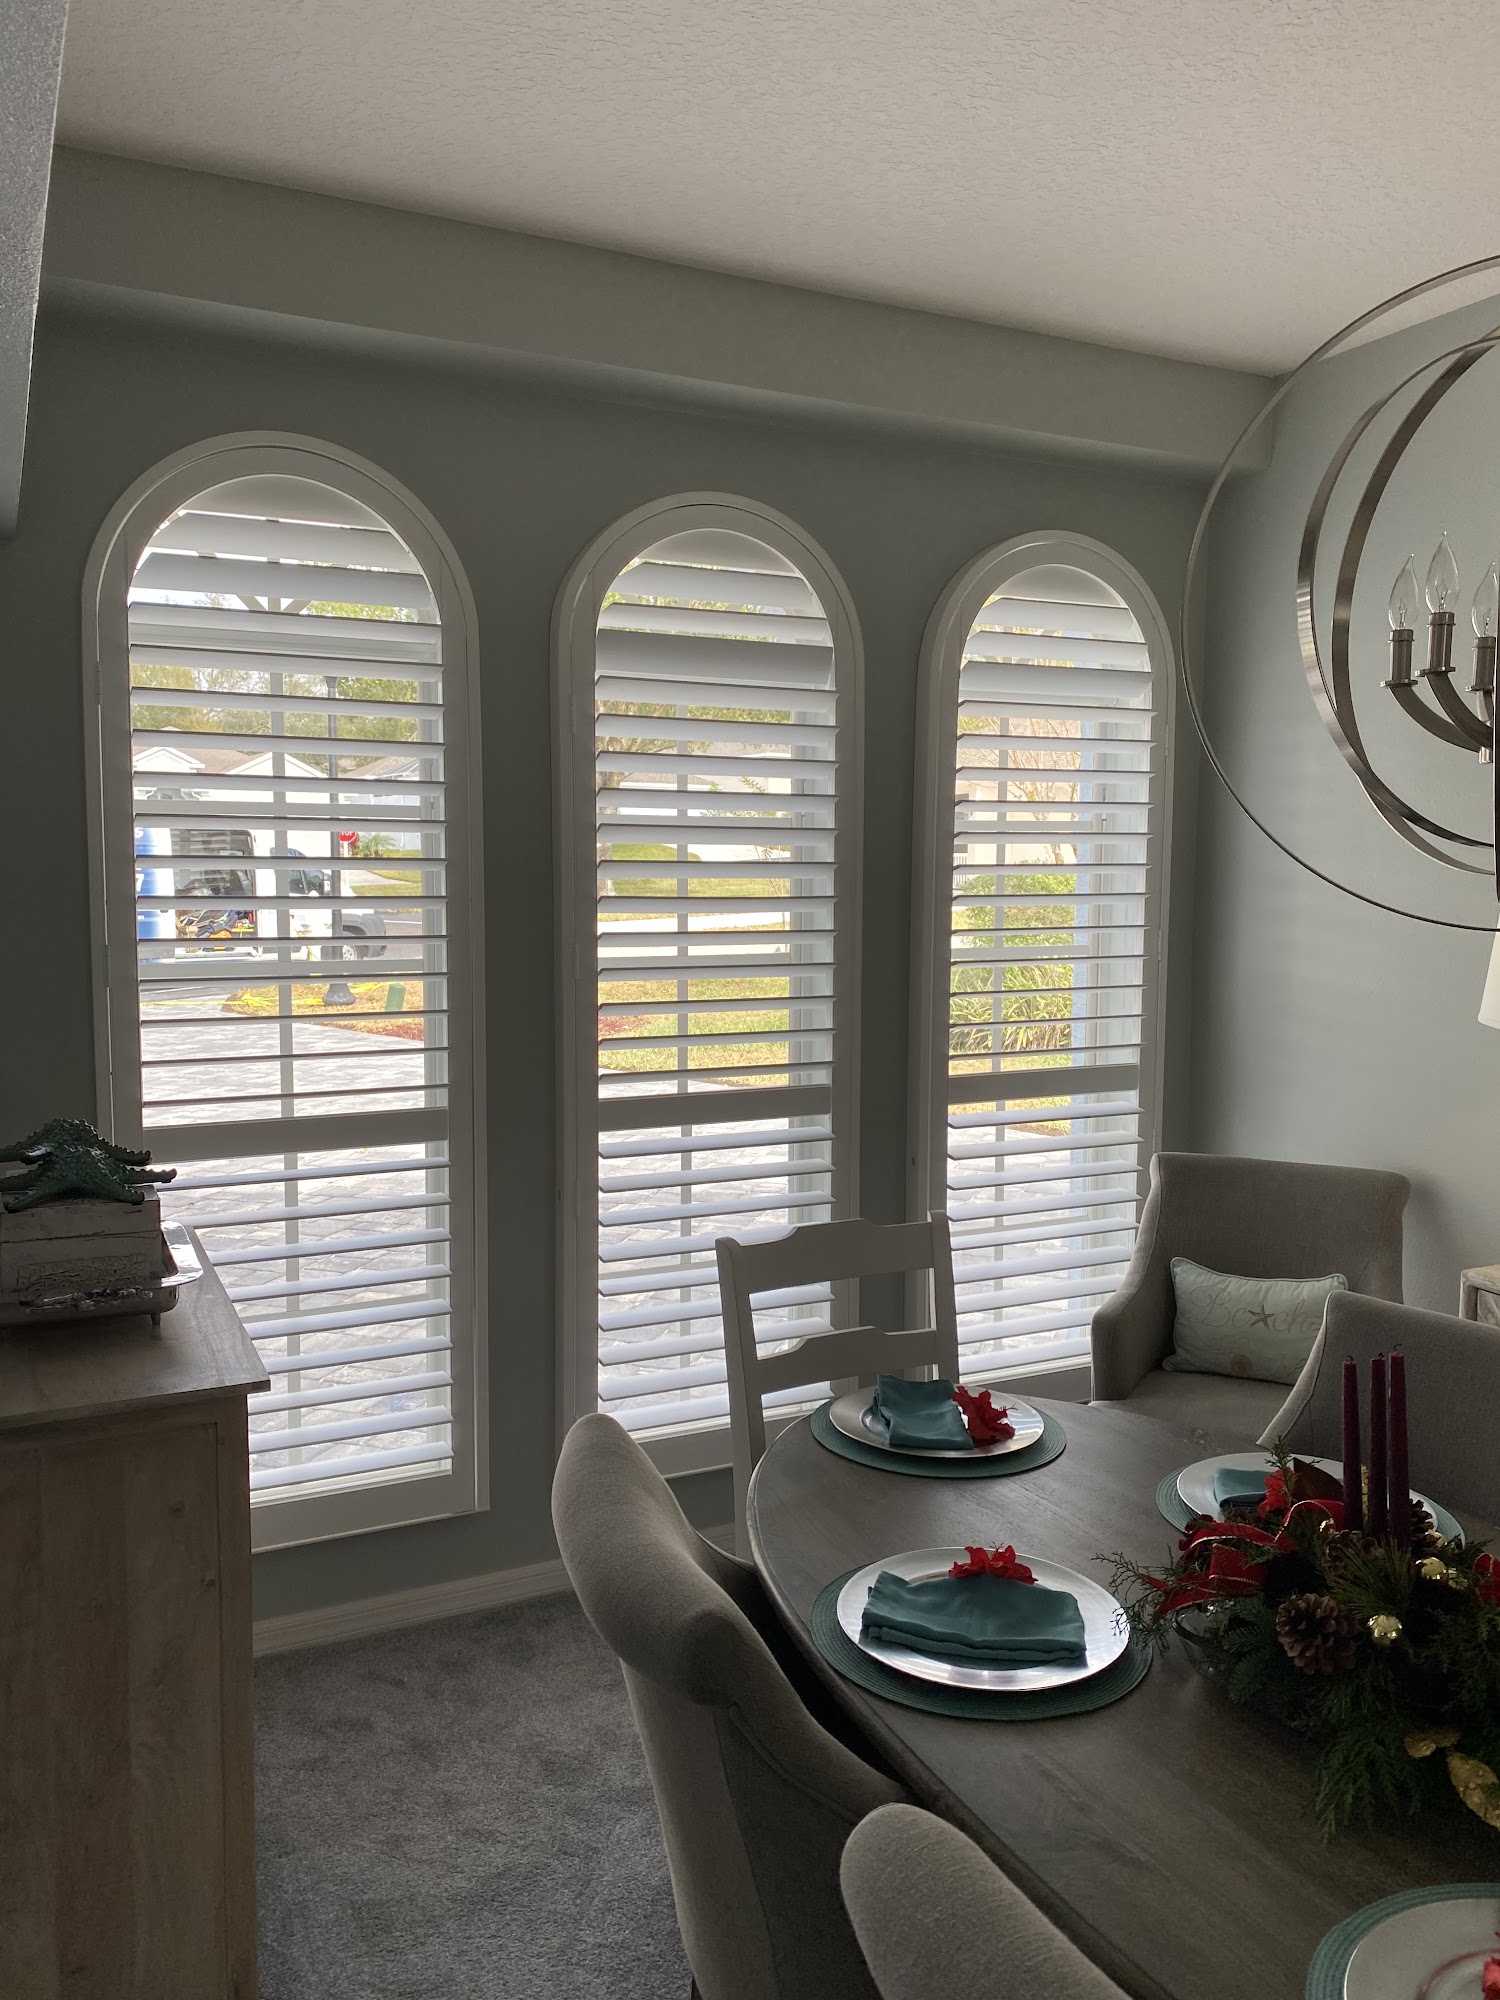 Budget Blinds of Clermont 1510 Max Hooks Rd suite h, Groveland Florida 34736